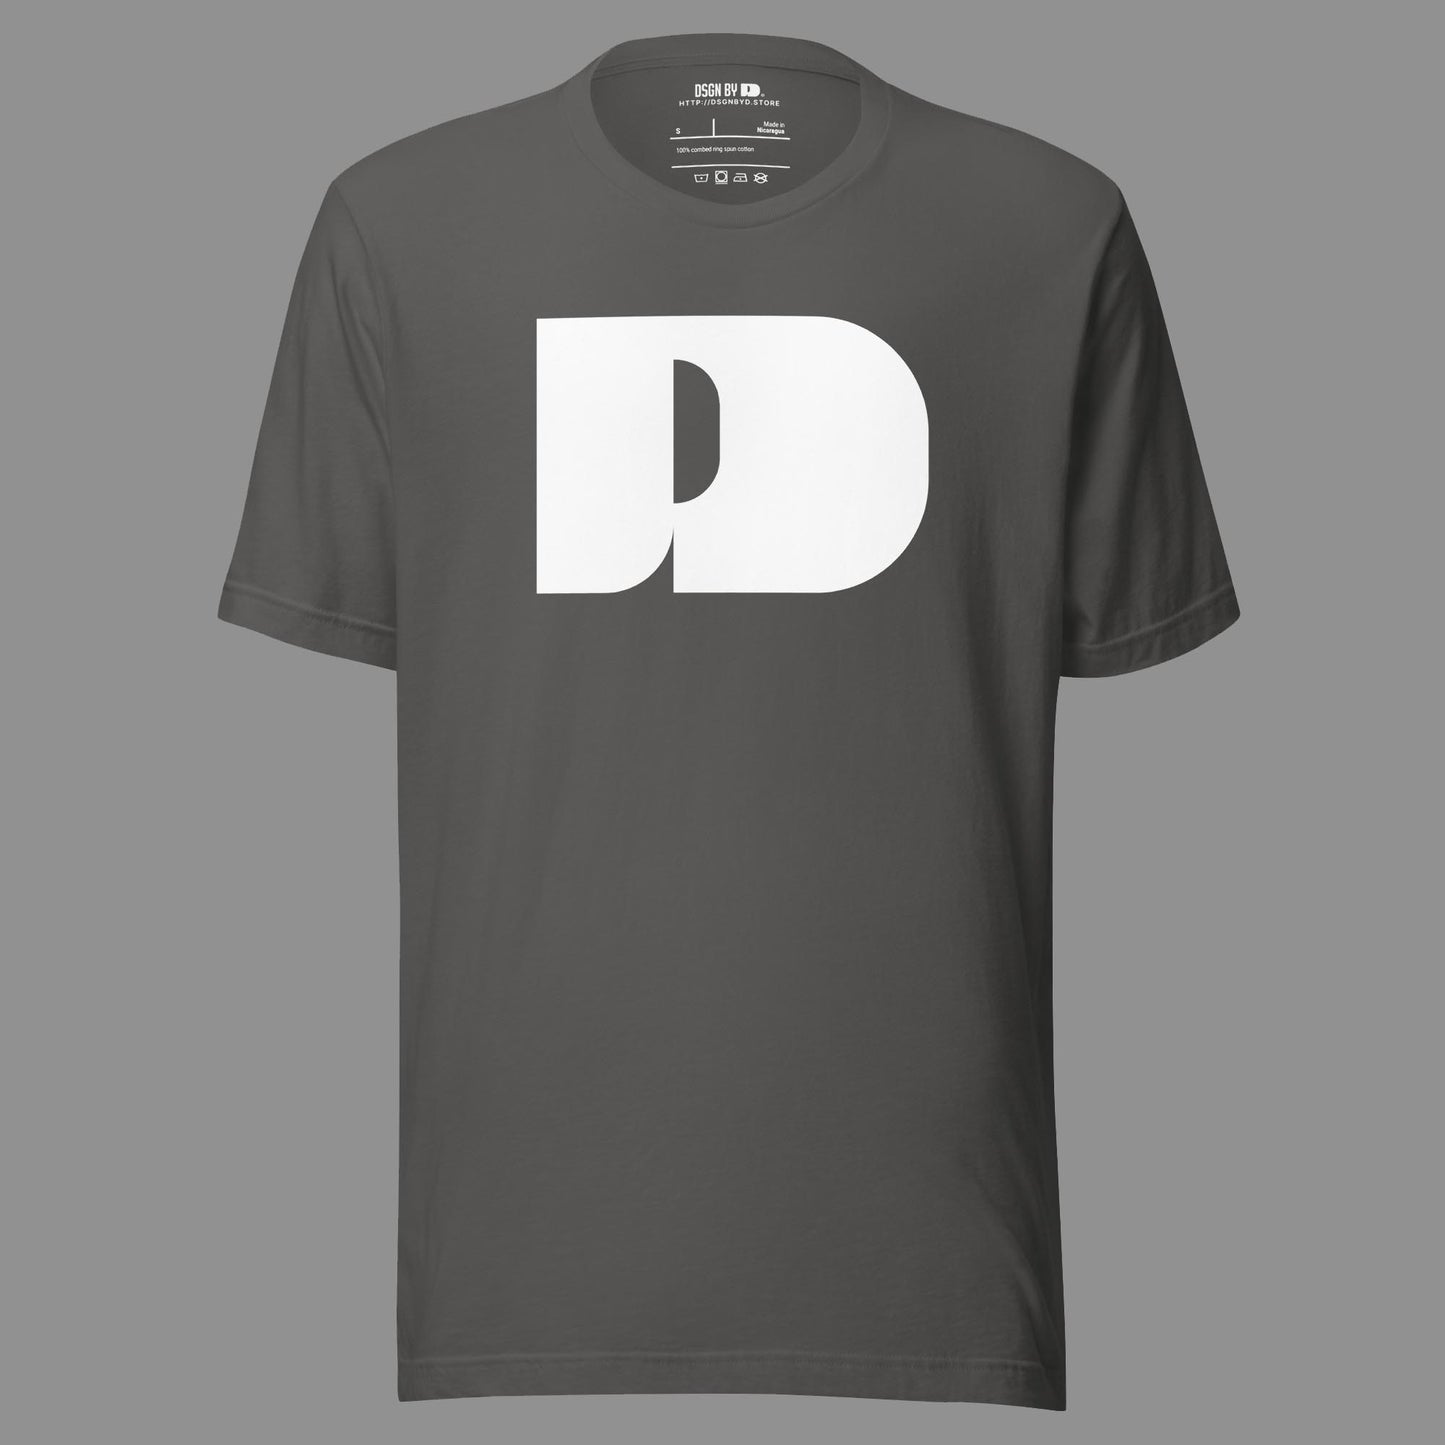 A grey cotton unisex graphic tee with letter D .